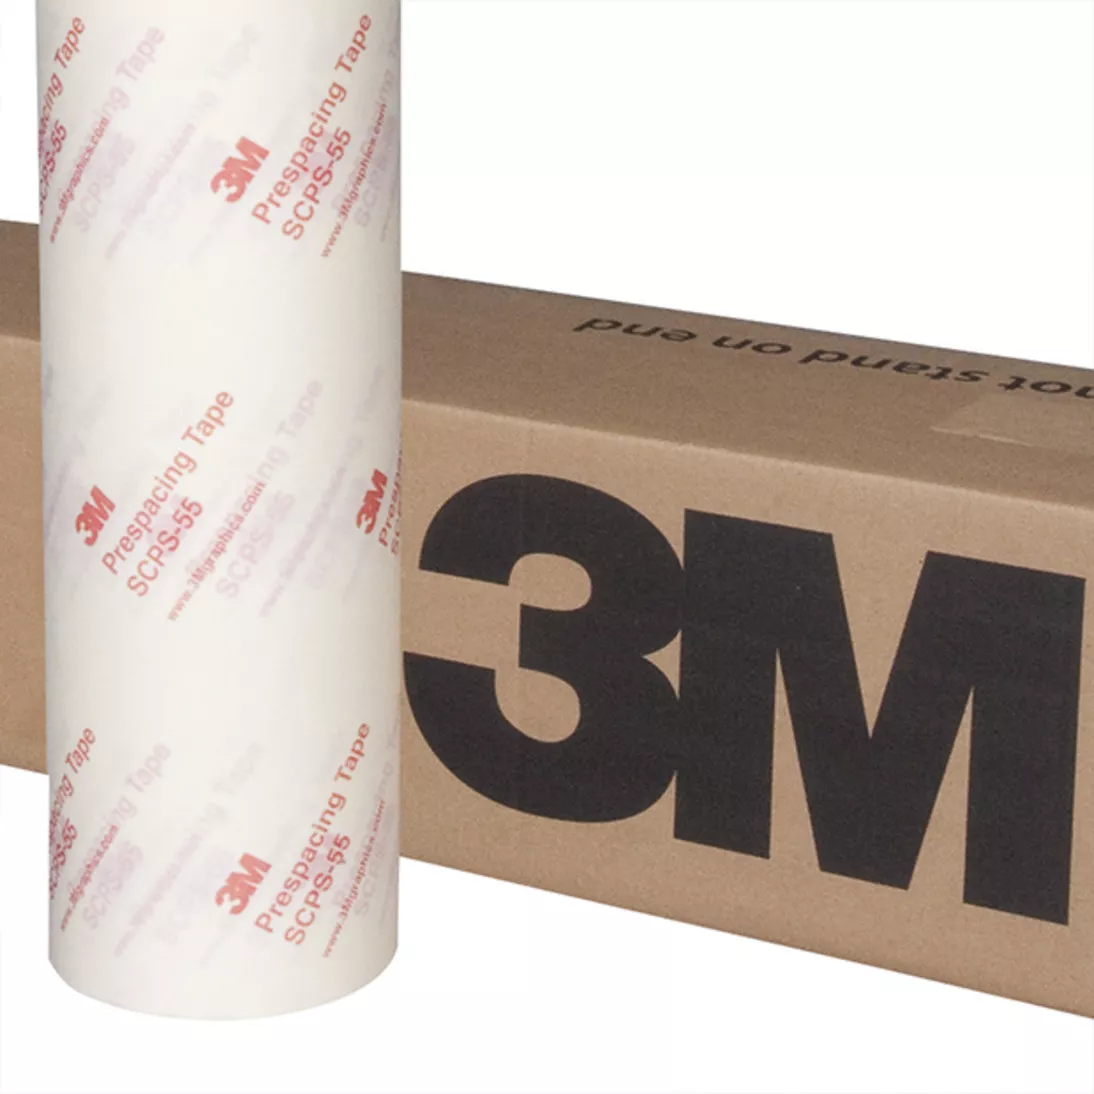 3M™ Prespacing Tape SCPS-55, 48 in x 250 yd, 1 Roll/Case